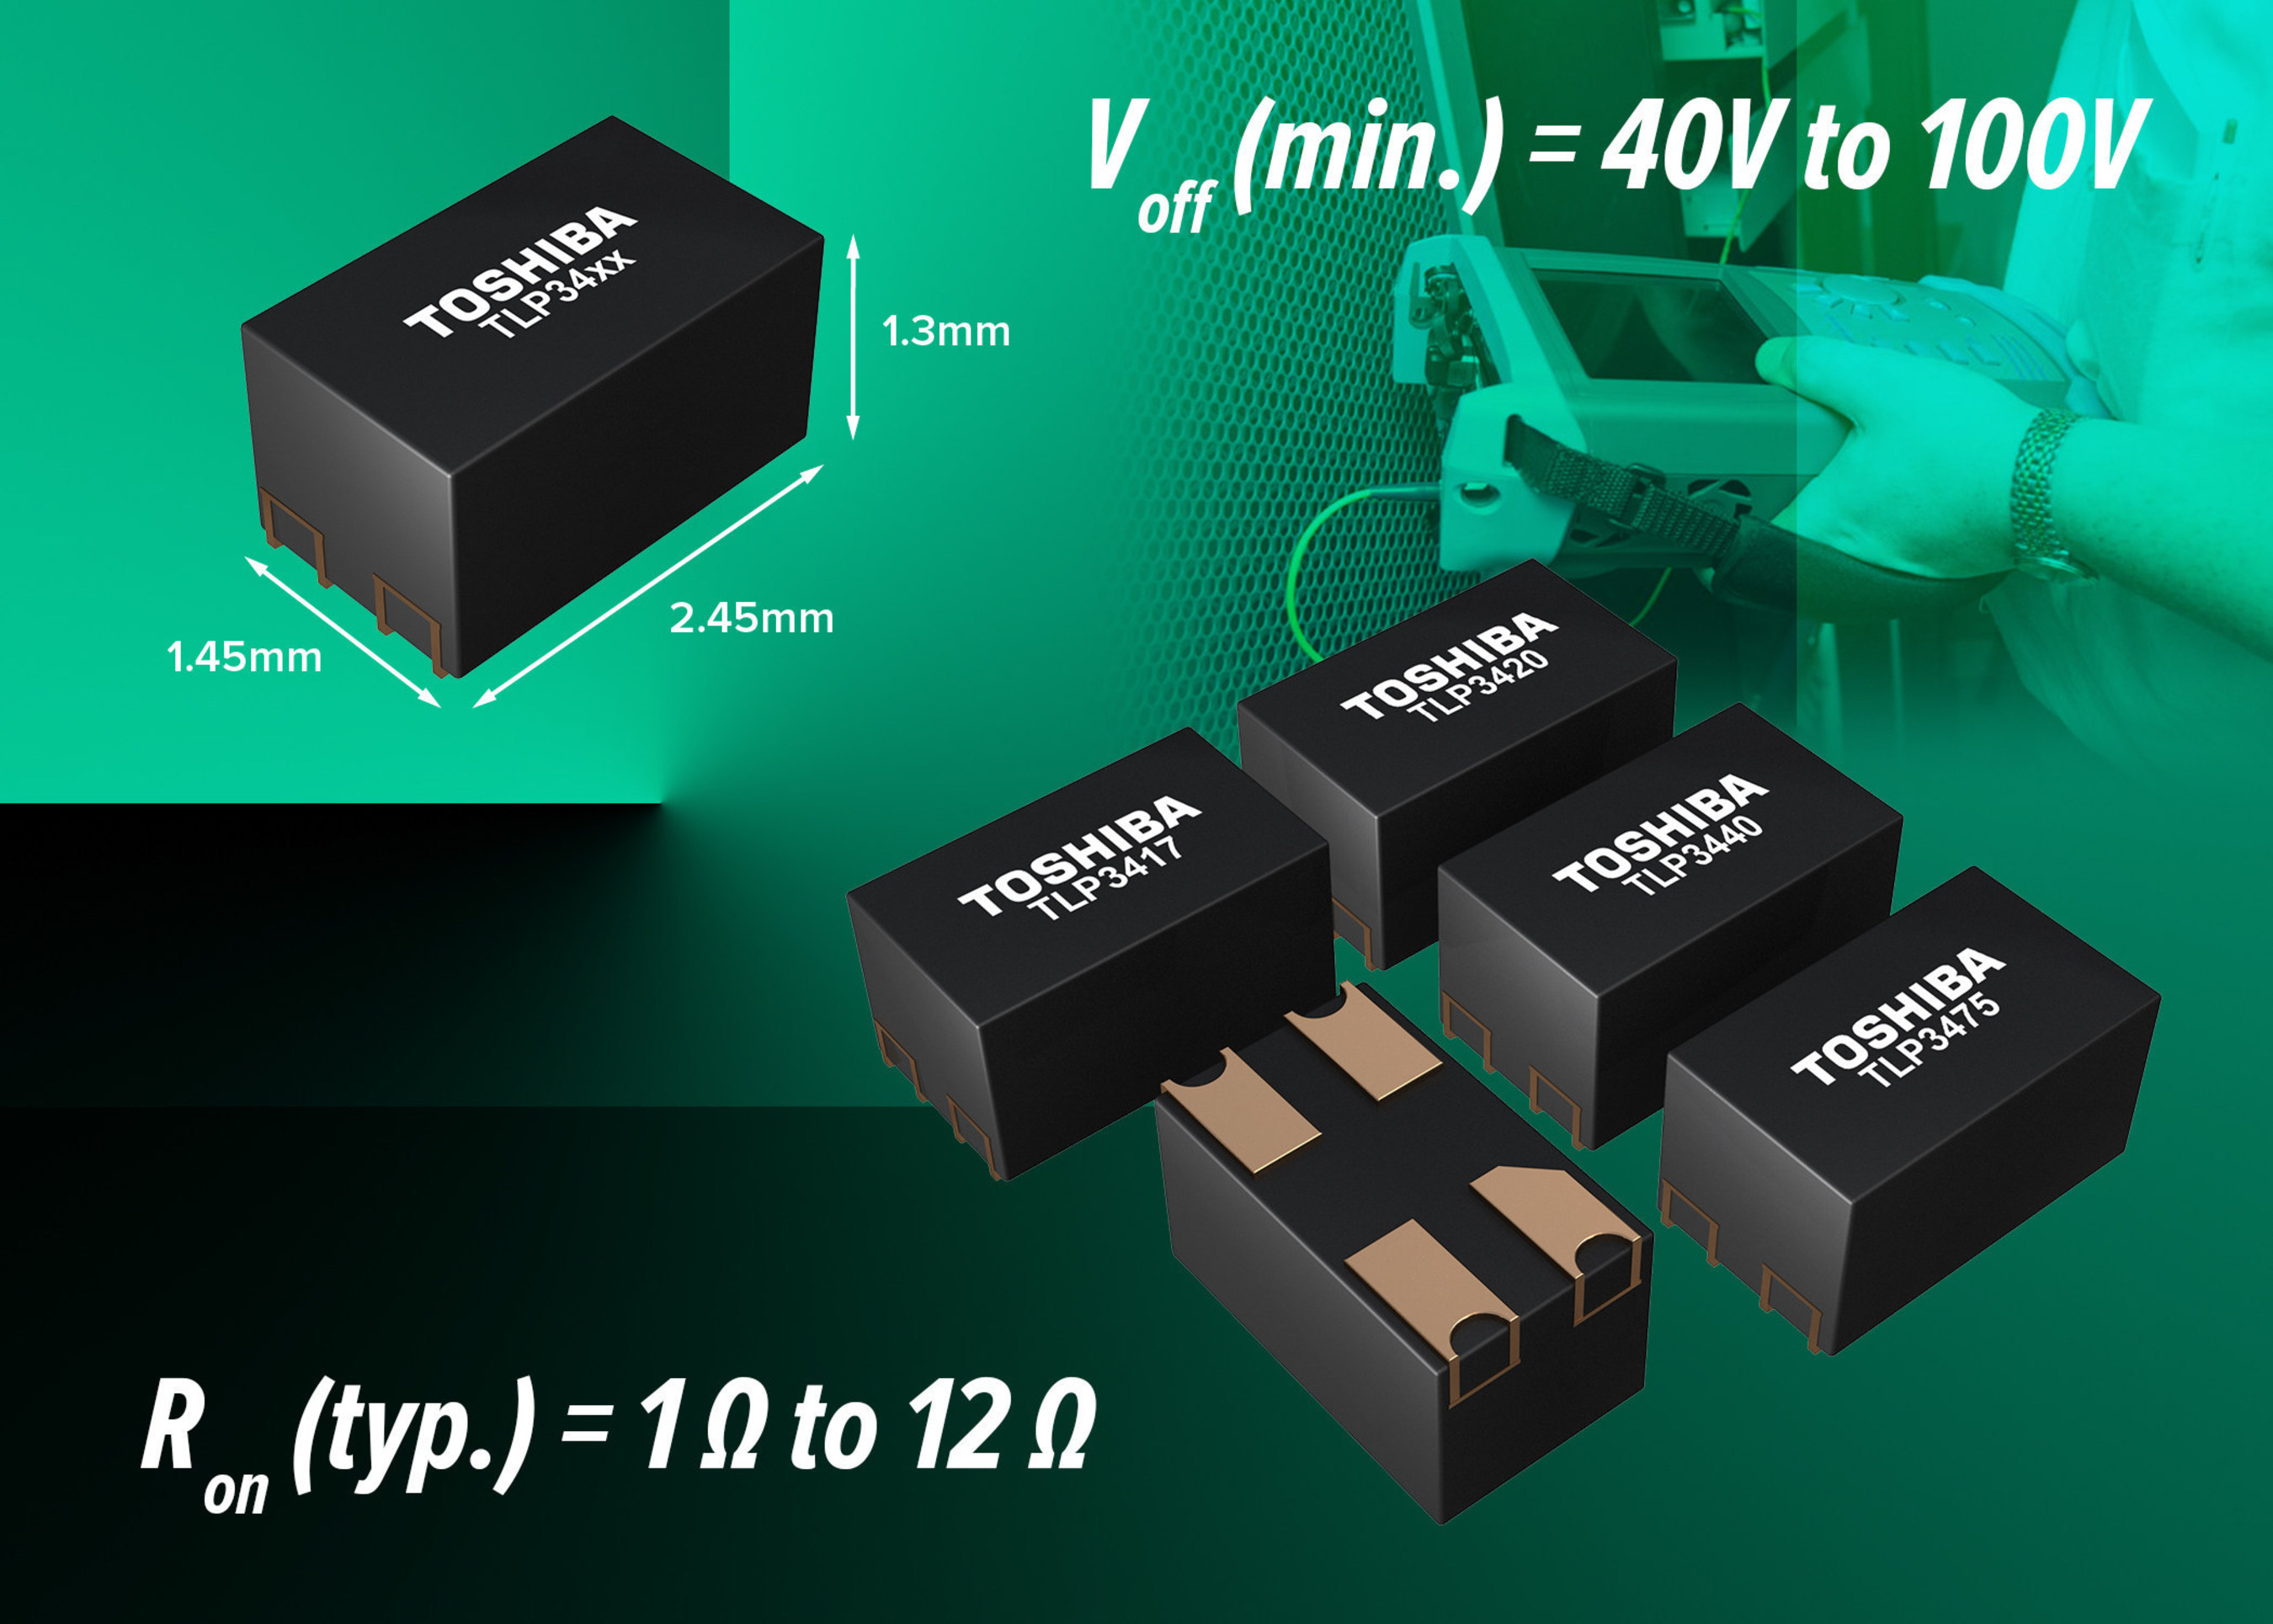 Toshiba's new photorelays are housed in the industry's smallest package